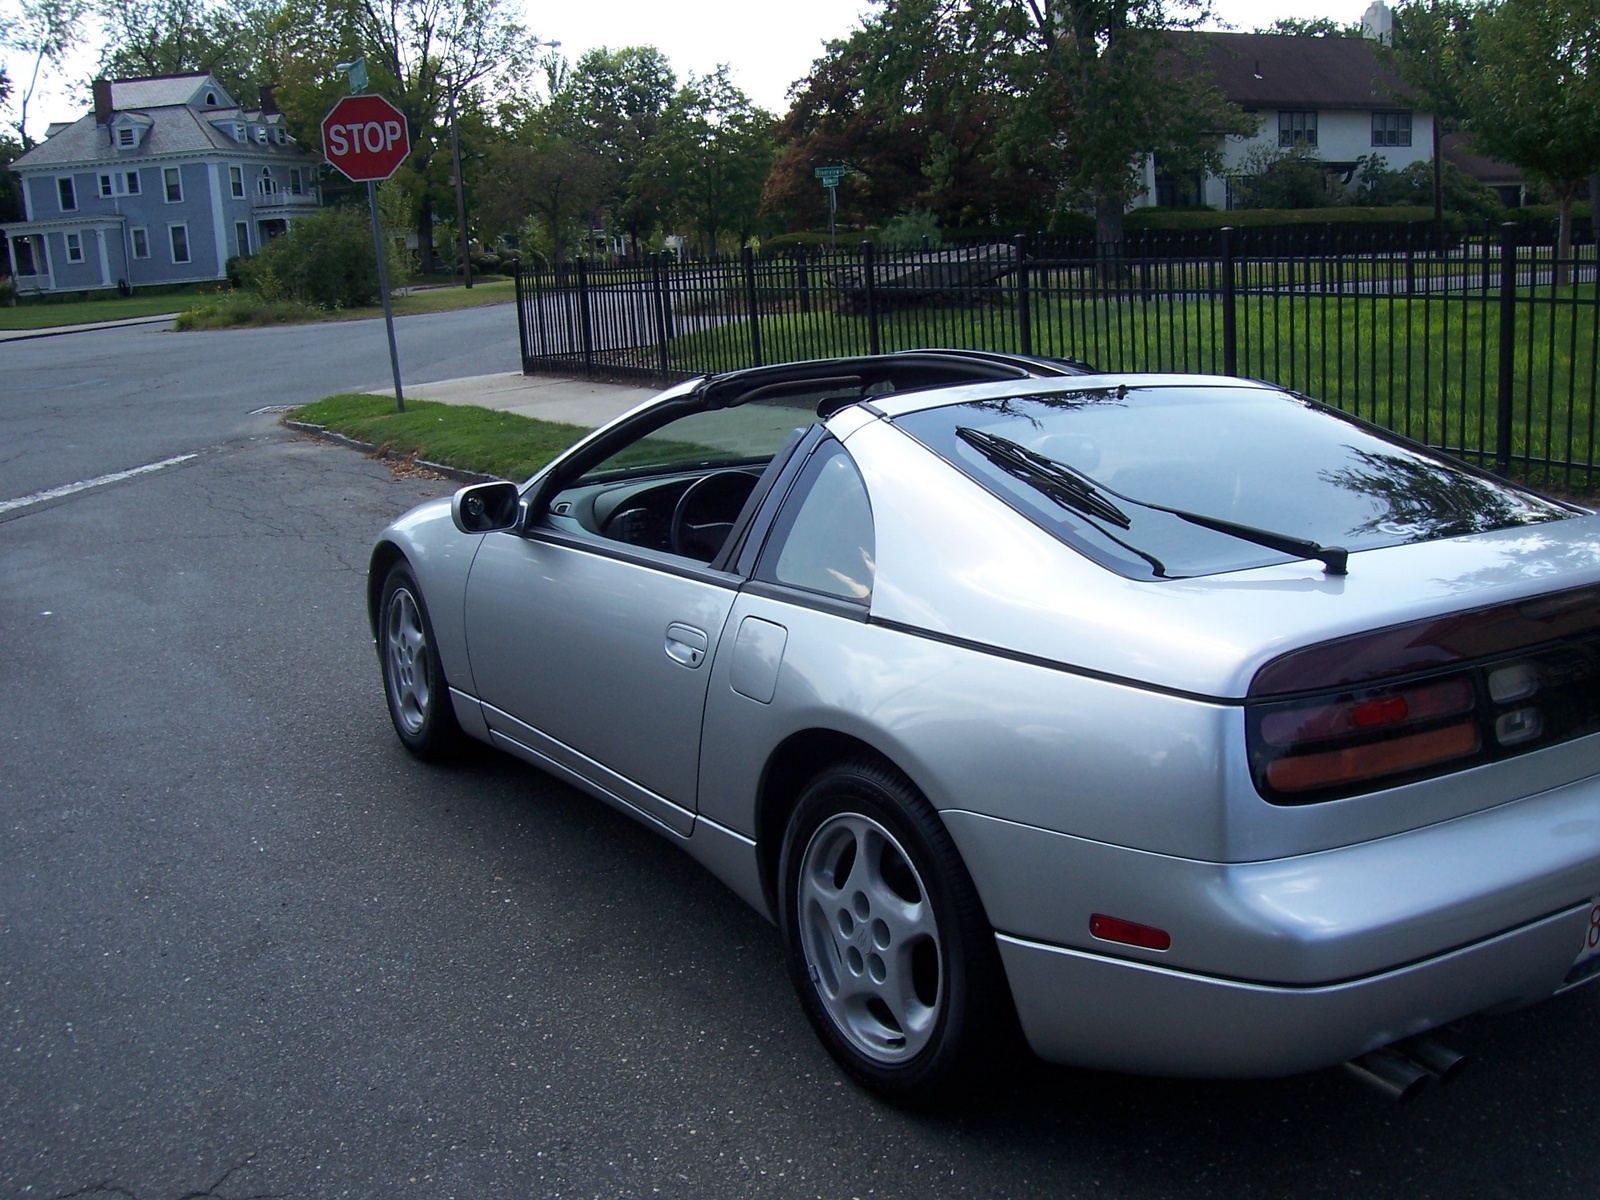 Picture of a 1990 nissan 300zx #7